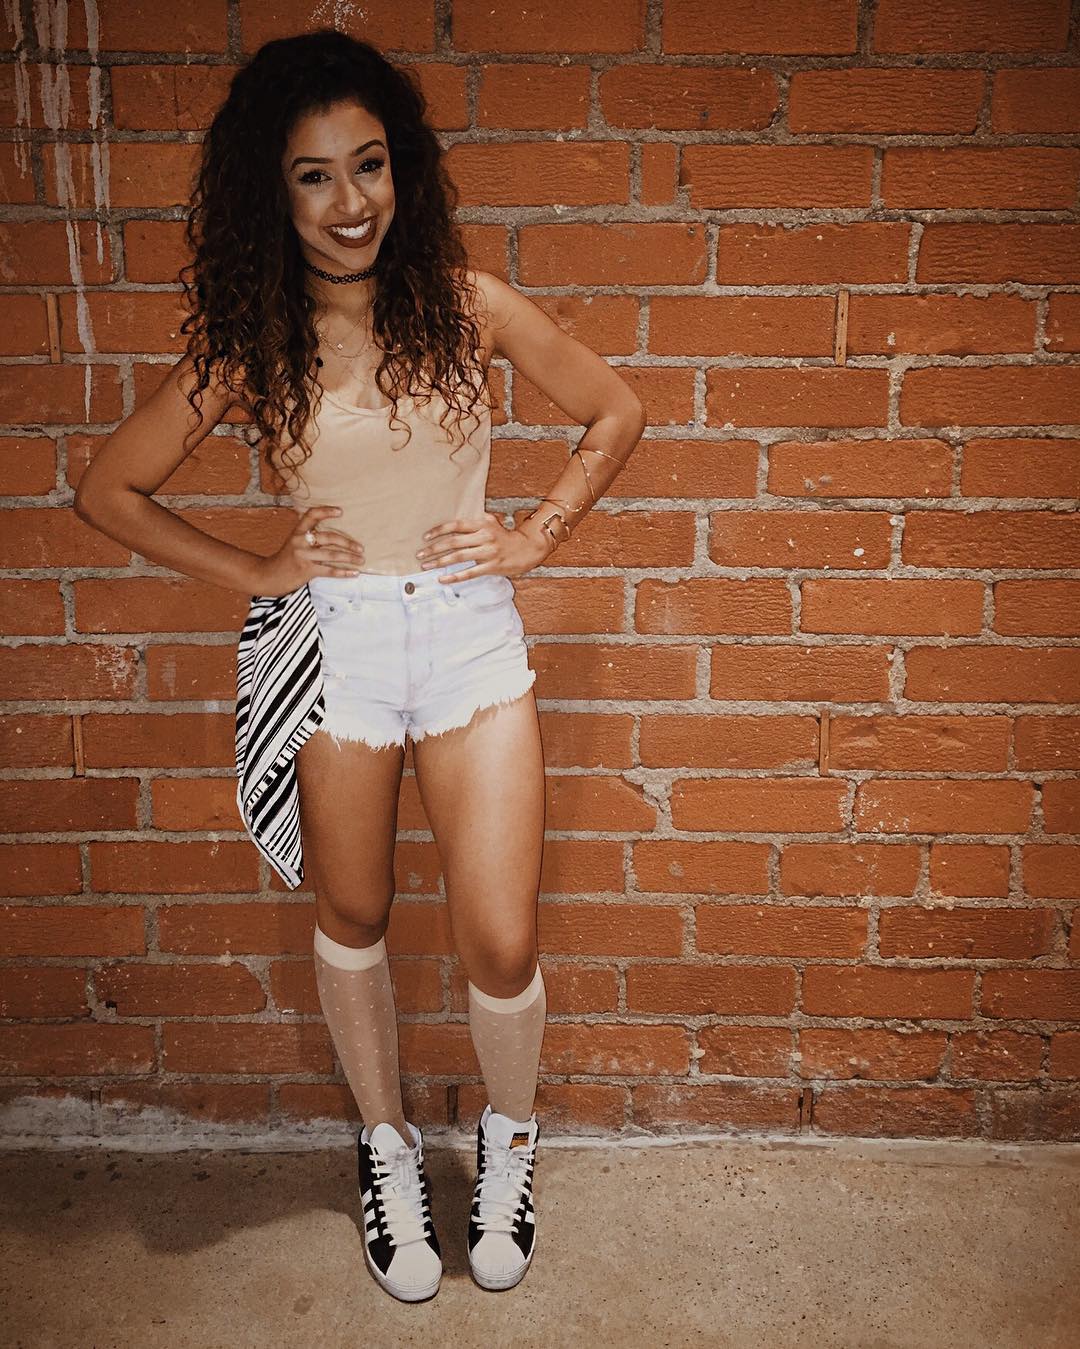 51 Sexy Liza Koshy Boobs Pictures Are A Charm For Her Fans 11